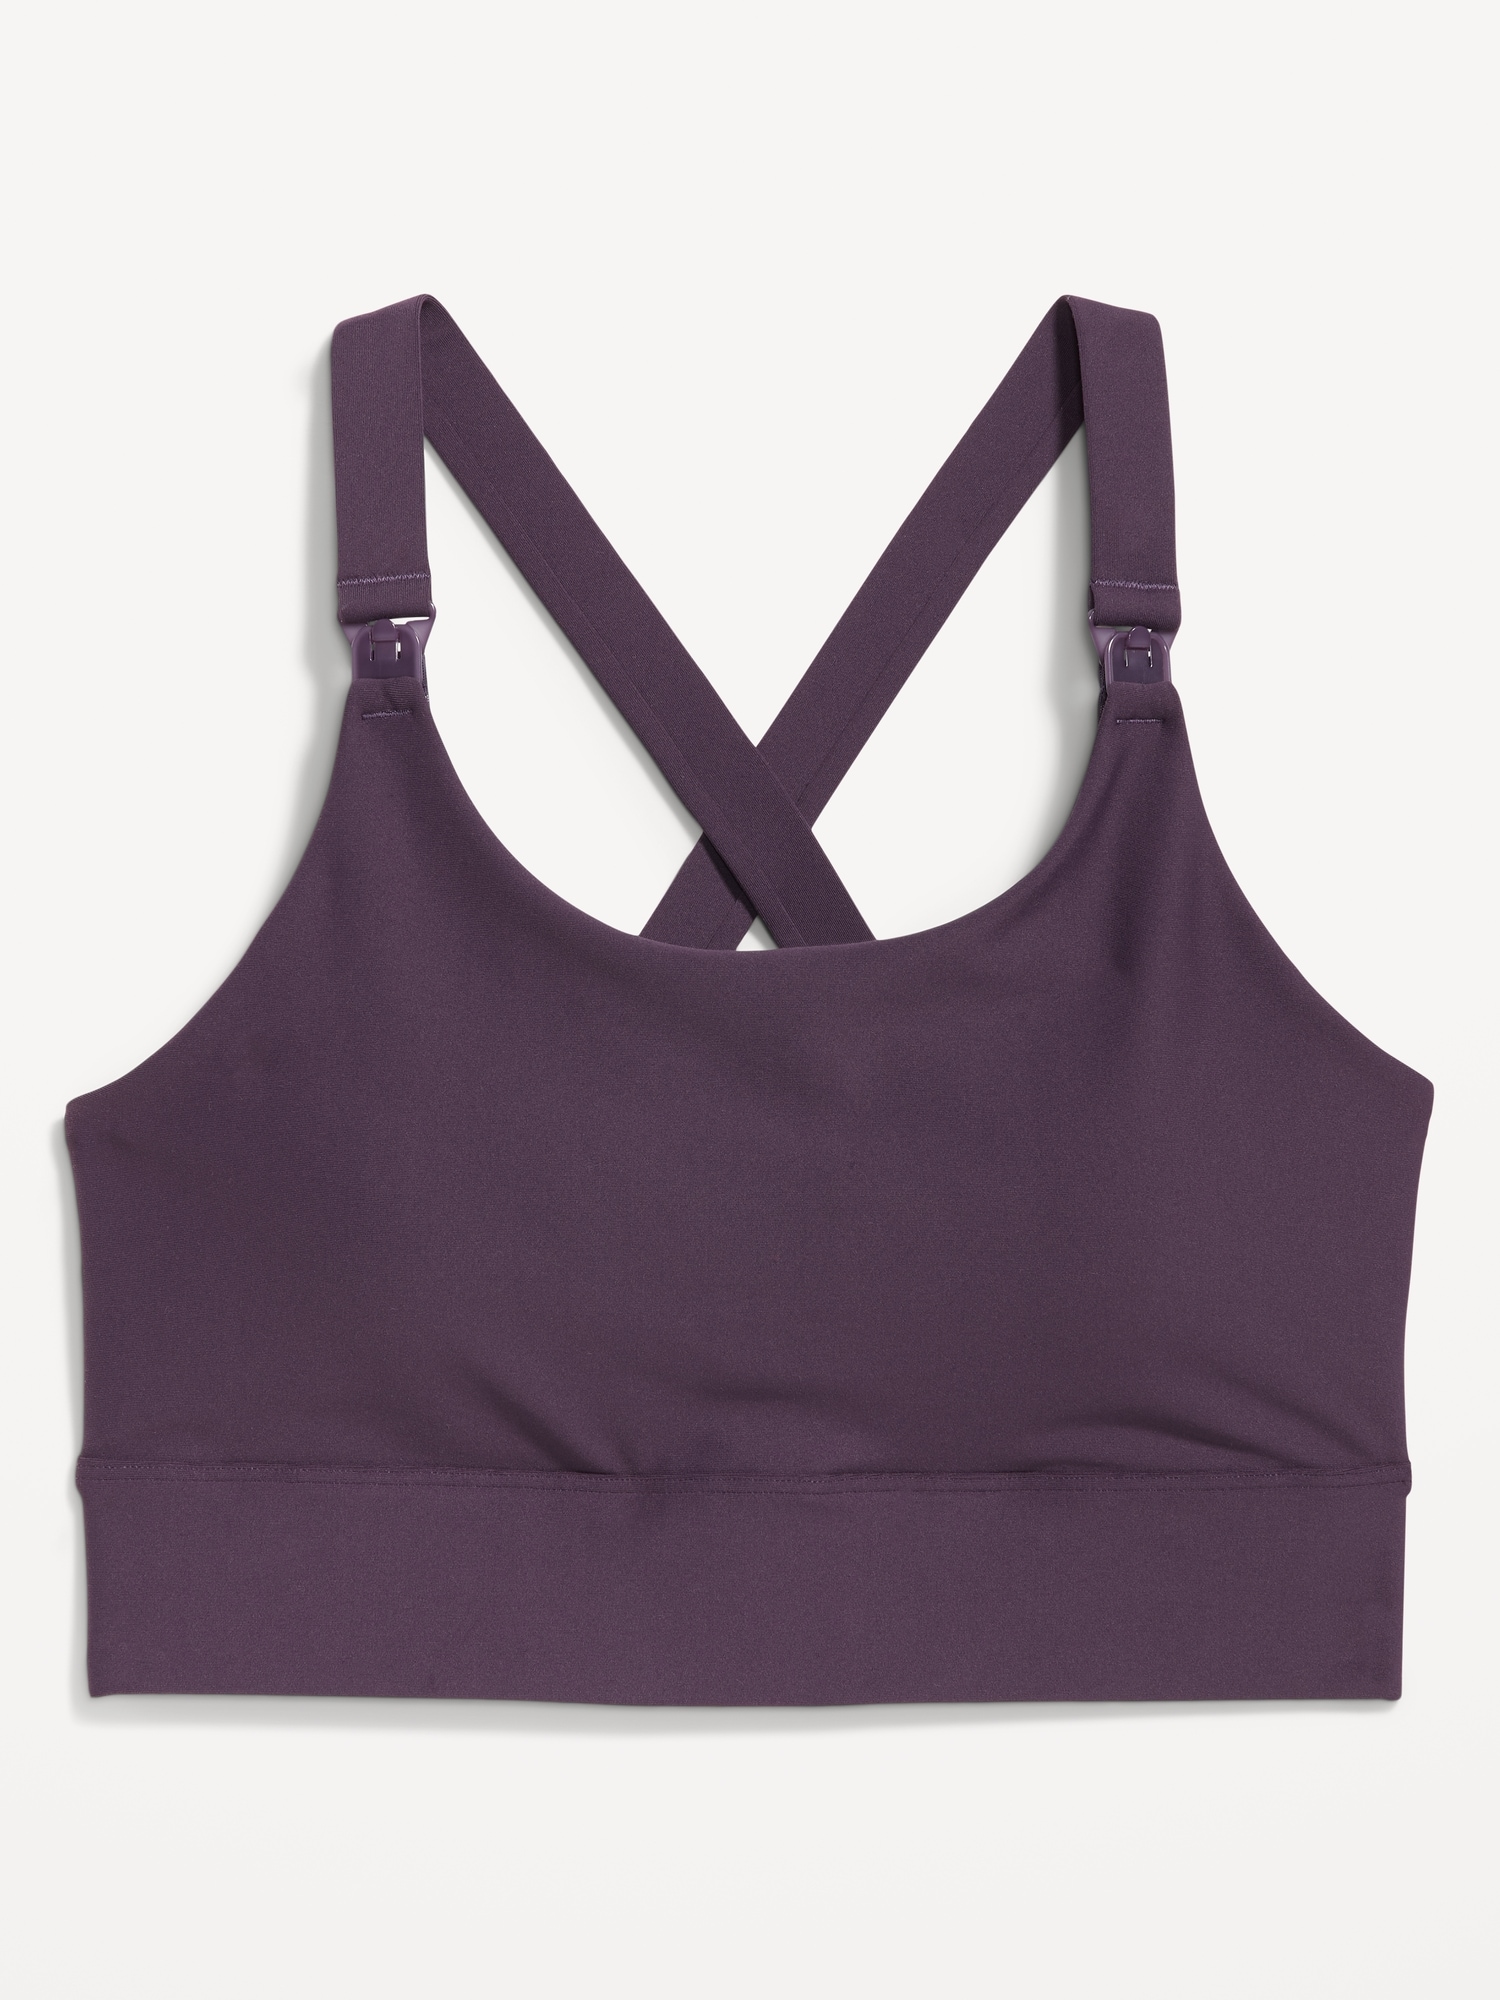 Old Navy Active Youth Girls Size Large Sports Bra Purple Lightly